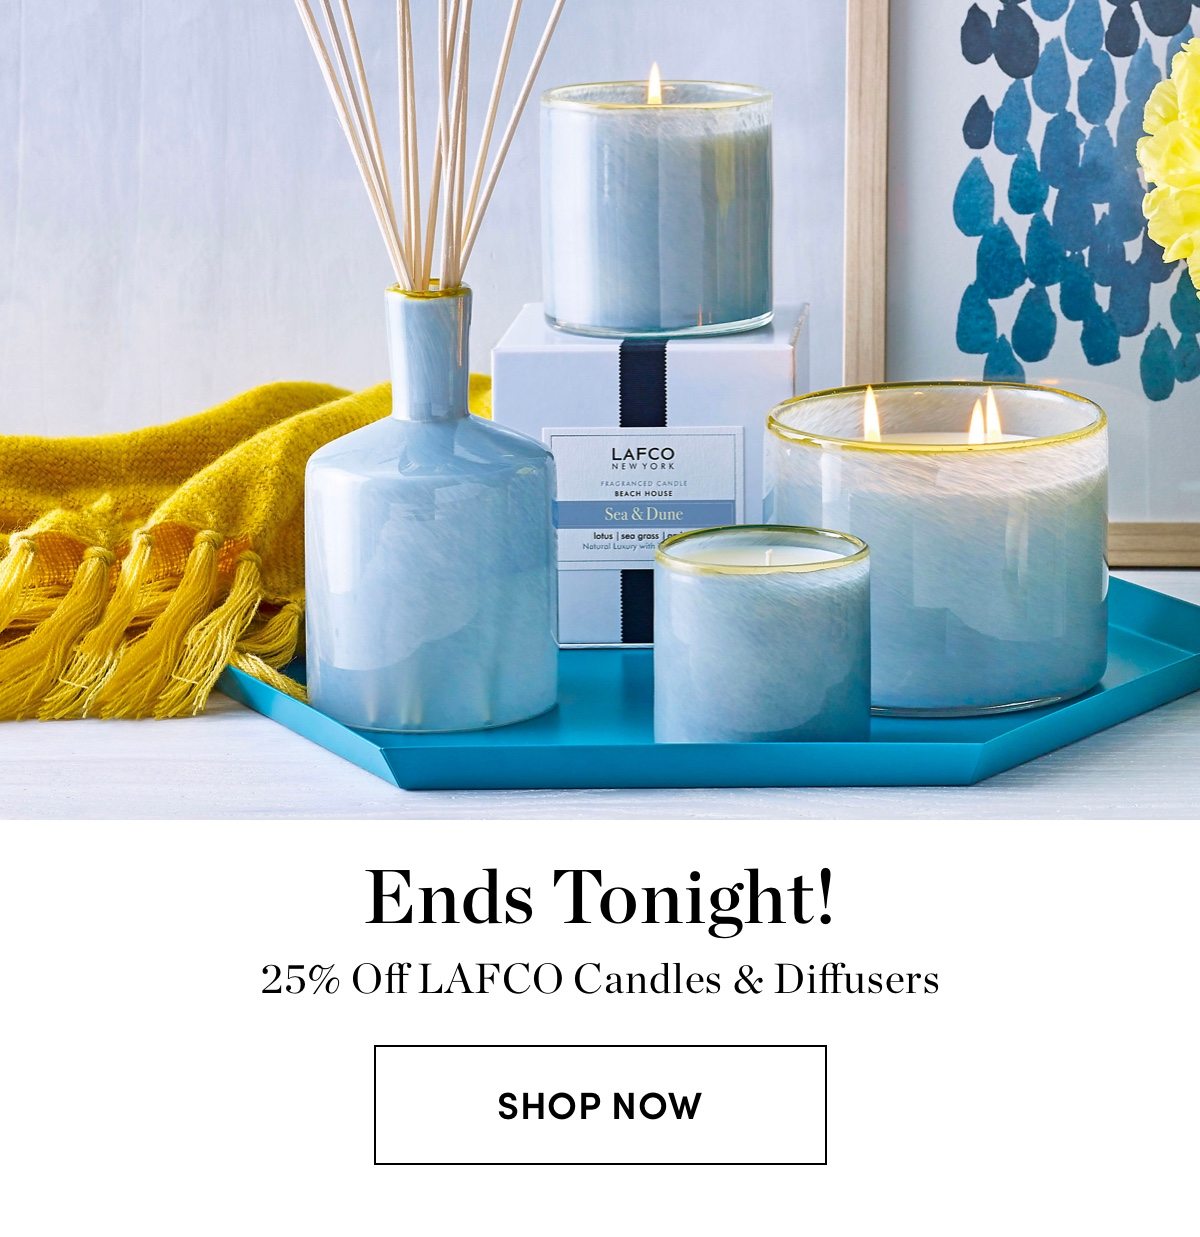 25% Off LAFCO Candles & Diffusers